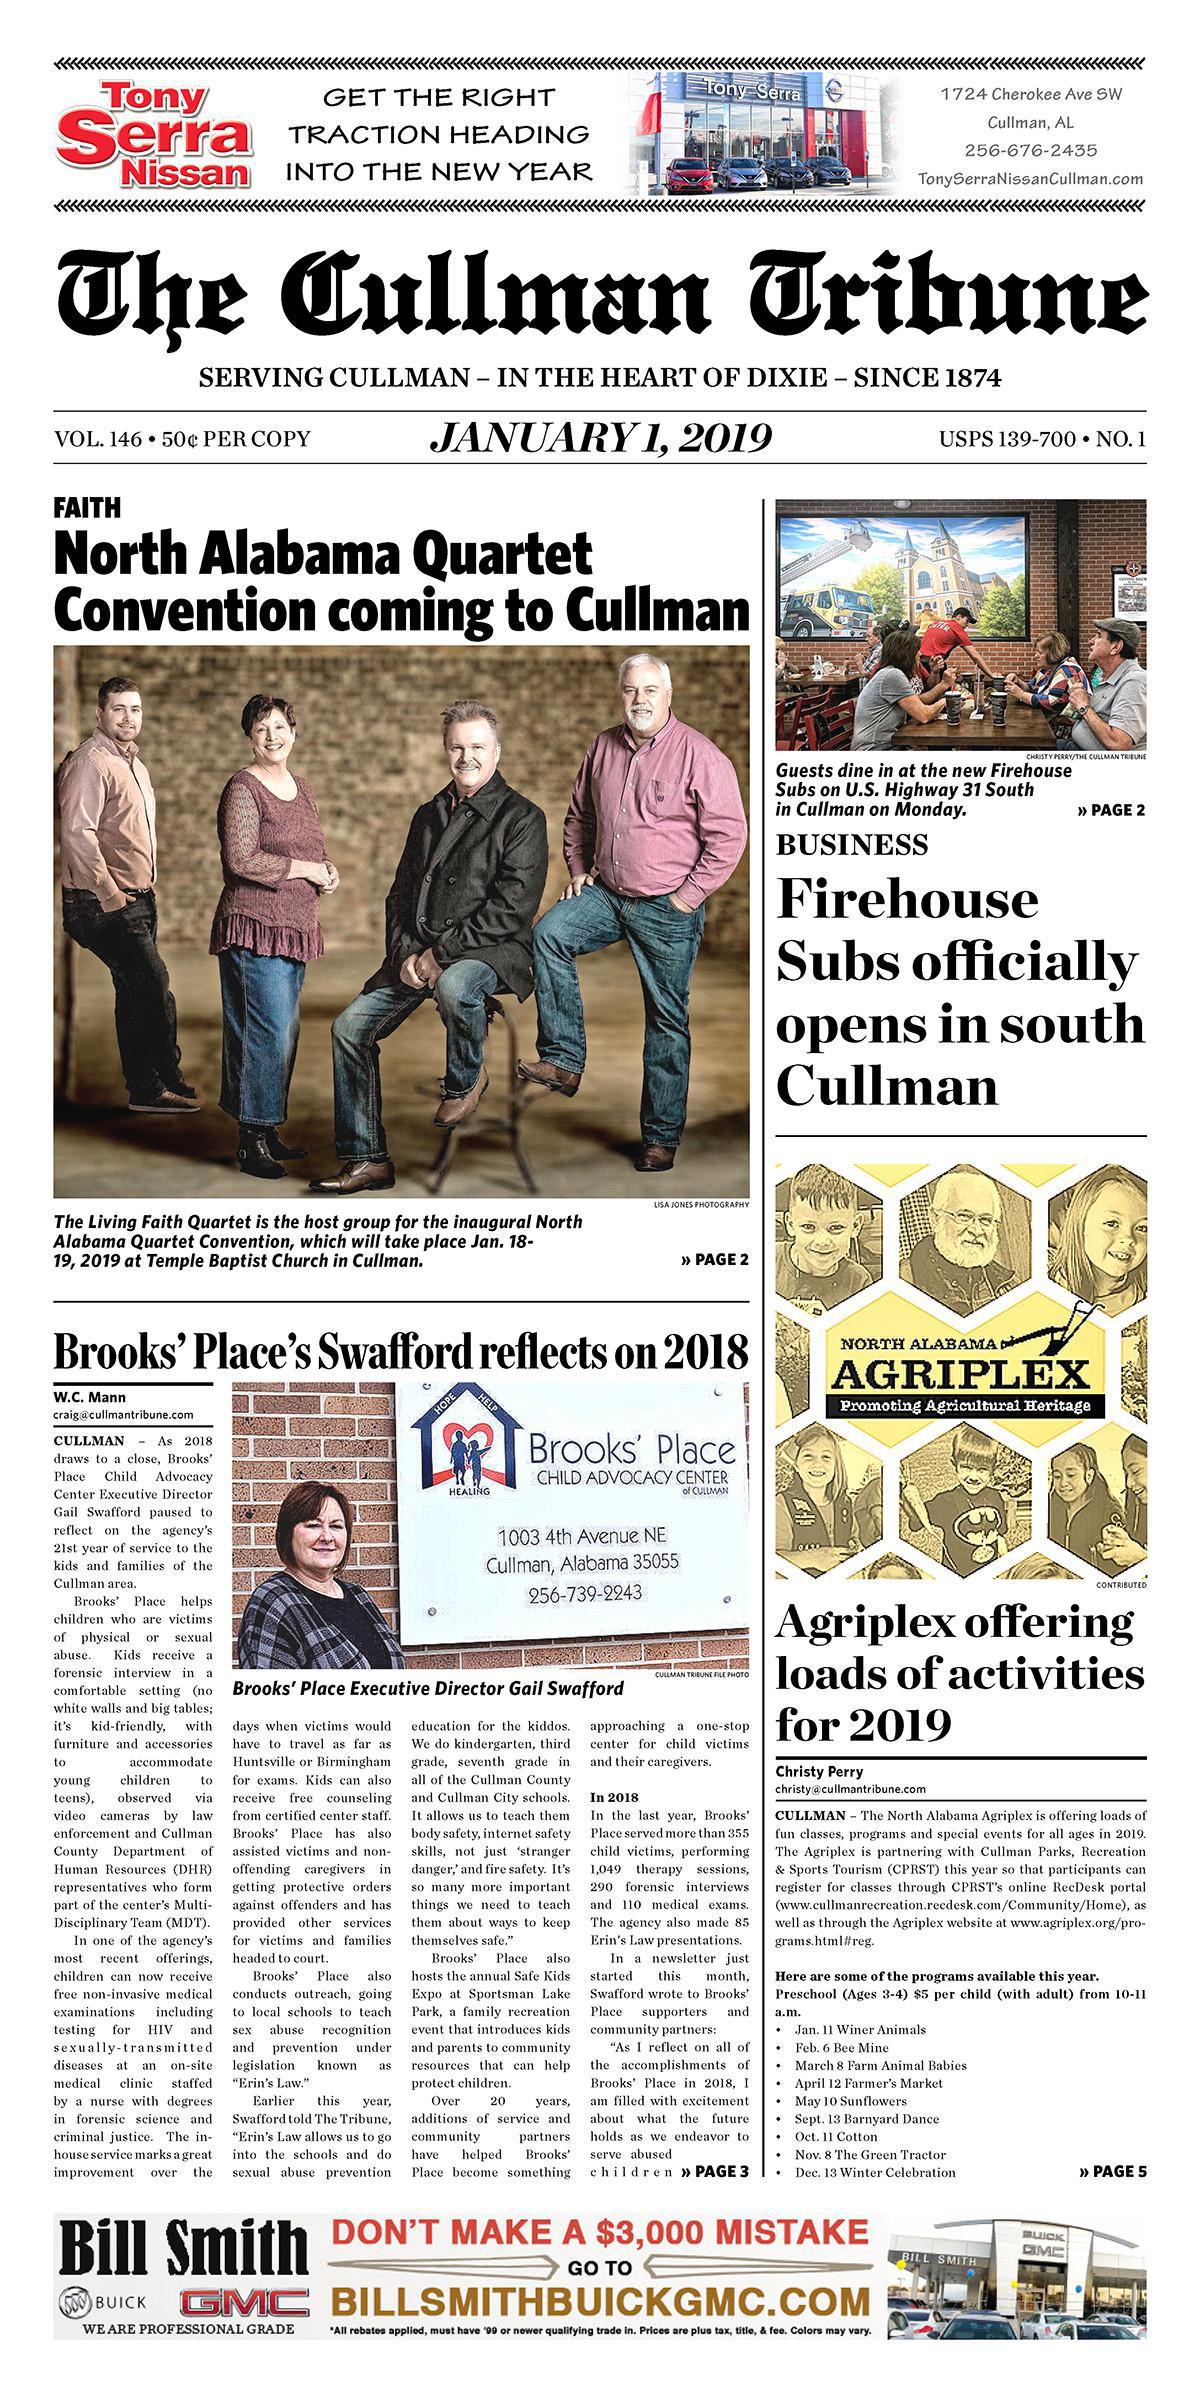 Good Morning Cullman! The 01-01-2019 edition of the Cullman Tribune is now ready to view